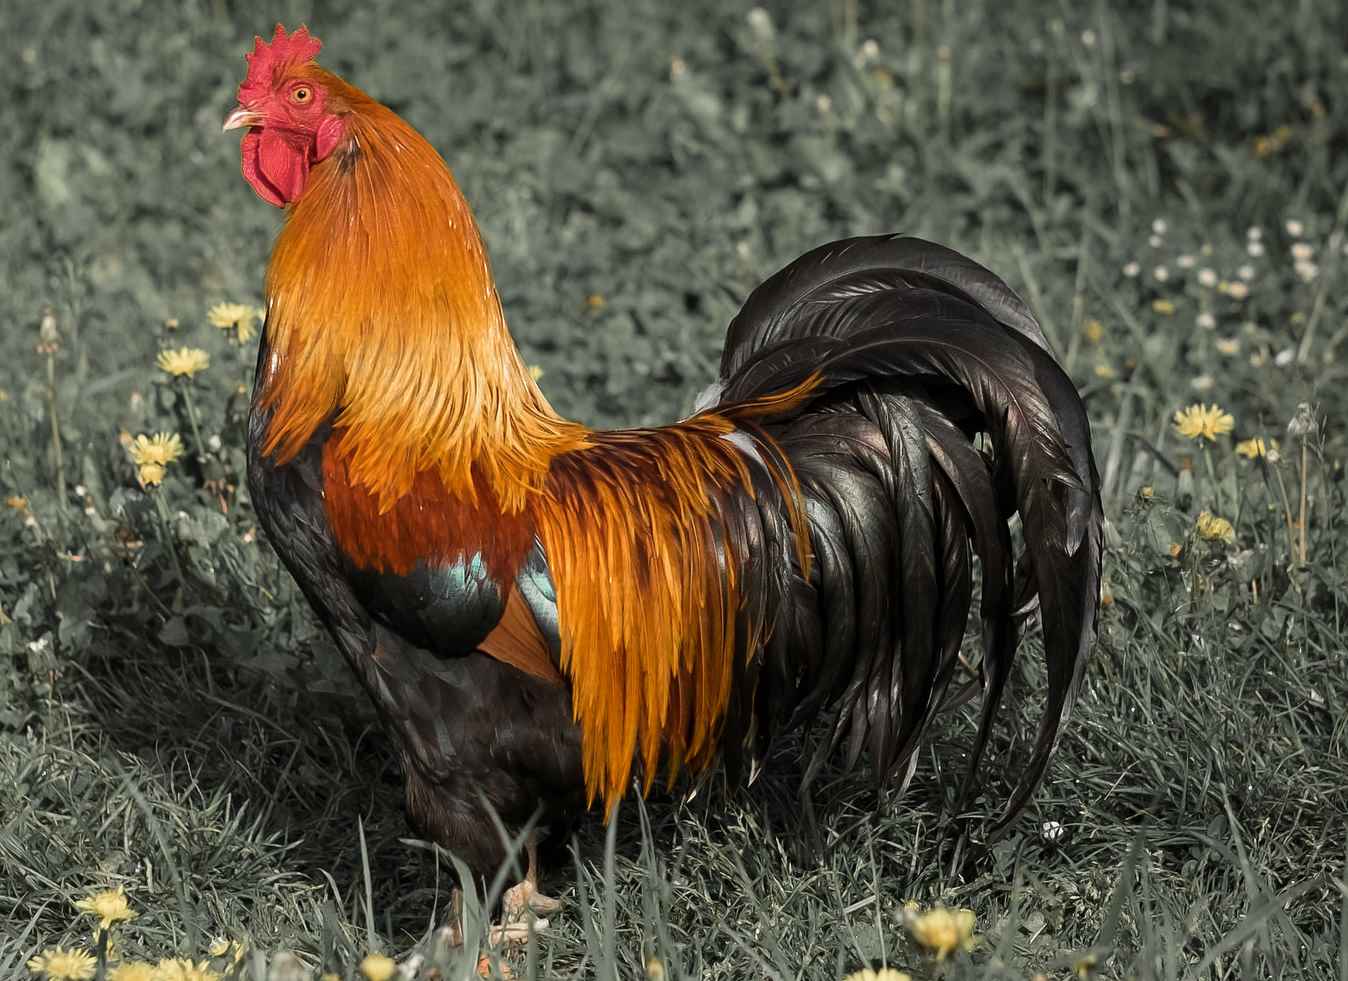 An orange and black chicken standing in some grass.